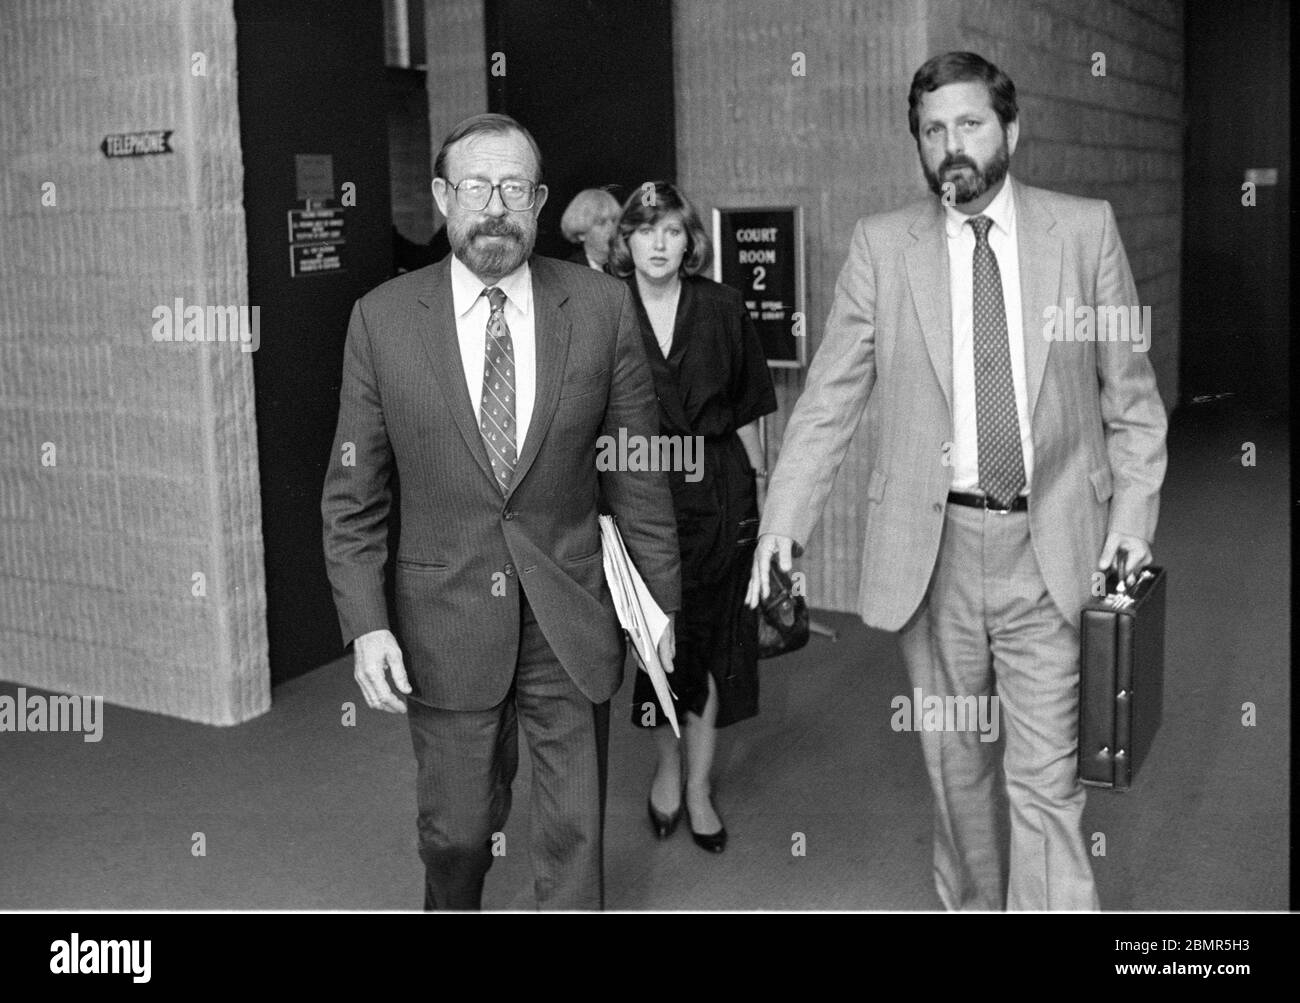 Wall Street securities analyst Joseph Pikul, left, with his lawyer, Ronald J. Bekoff at the Orange County Courthouse where is tried for the murder of his second wife, Diane Whitmore, at the Goshen, NY on January 15, 1989. Pikul’s third wife, Mary Bain, is shown in the background. Photo by Francis Specker Stock Photo